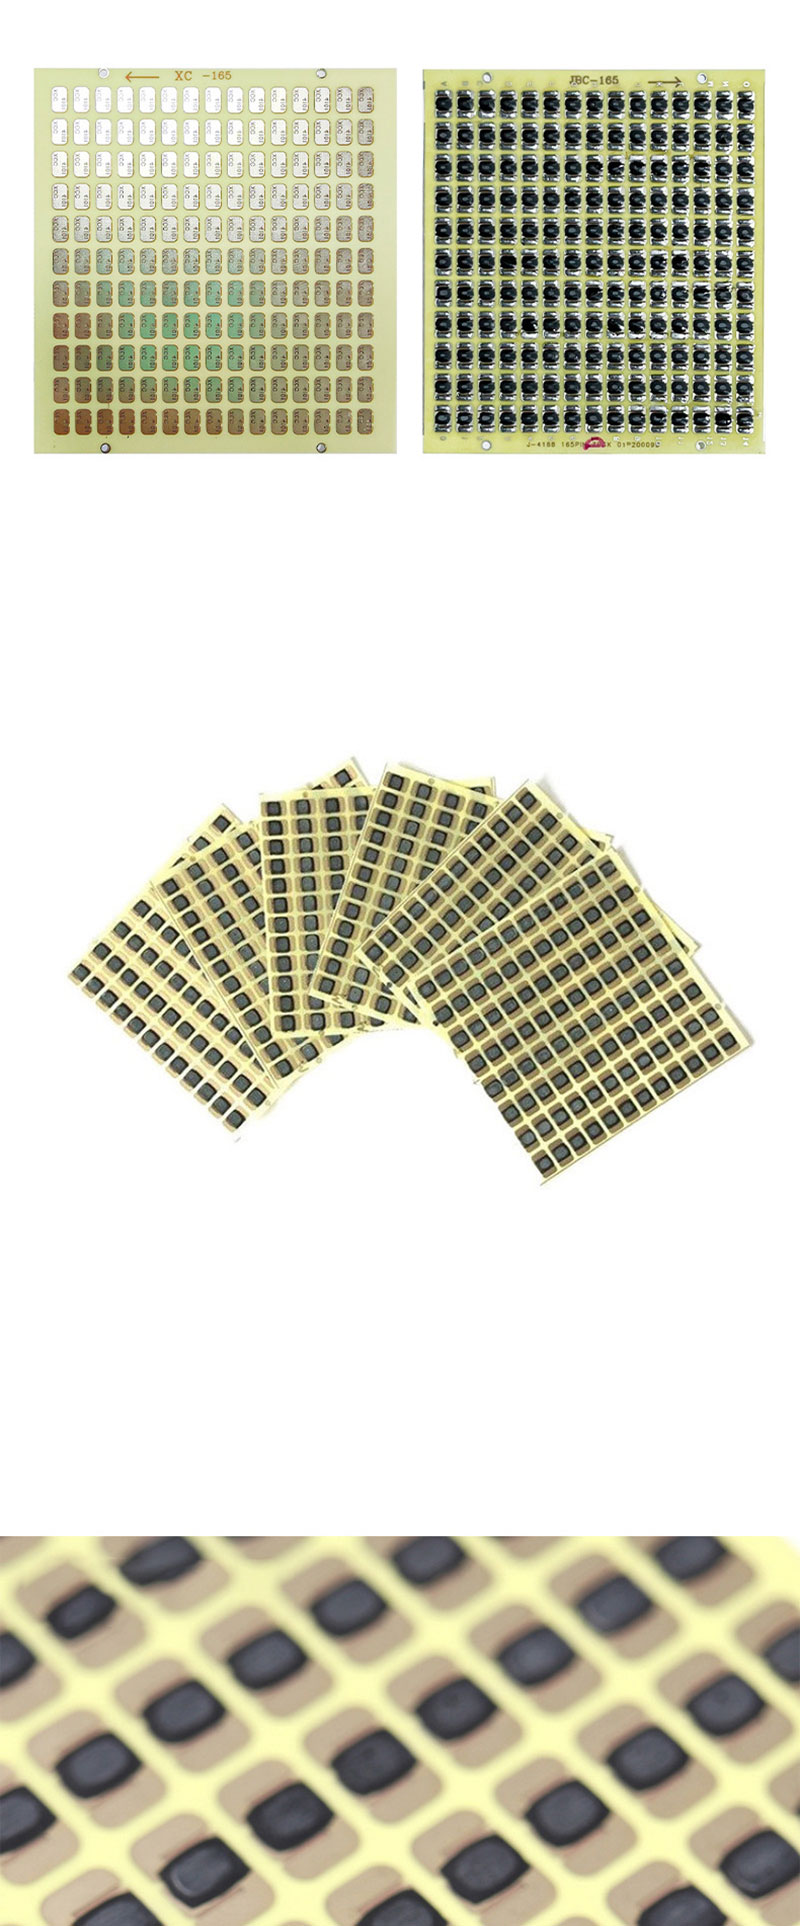 Factory-made low-frequency IC core material COB tag chip RFID electronic tag chip packaging smart card 2